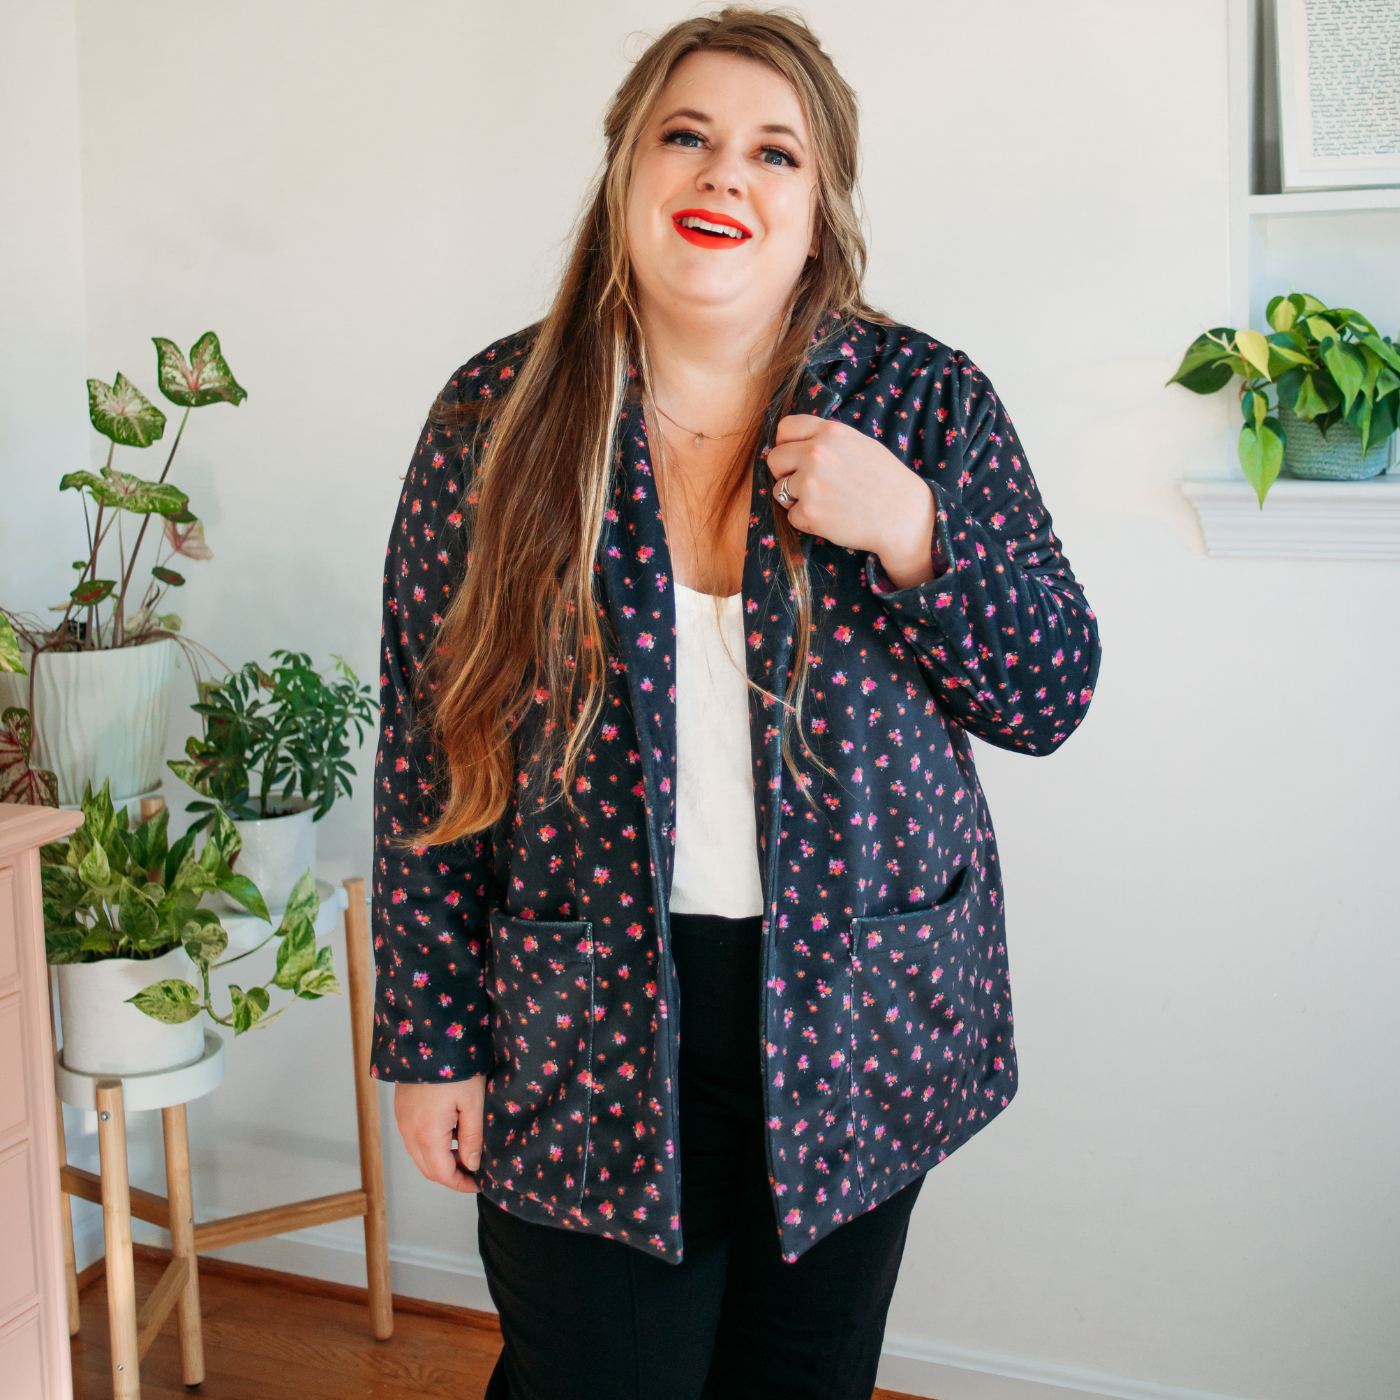 Meg stands wearing black pants and a white top with a dark blue velvet blazer over top. The fabric of the blazer has small pink flowers dotted all over it.